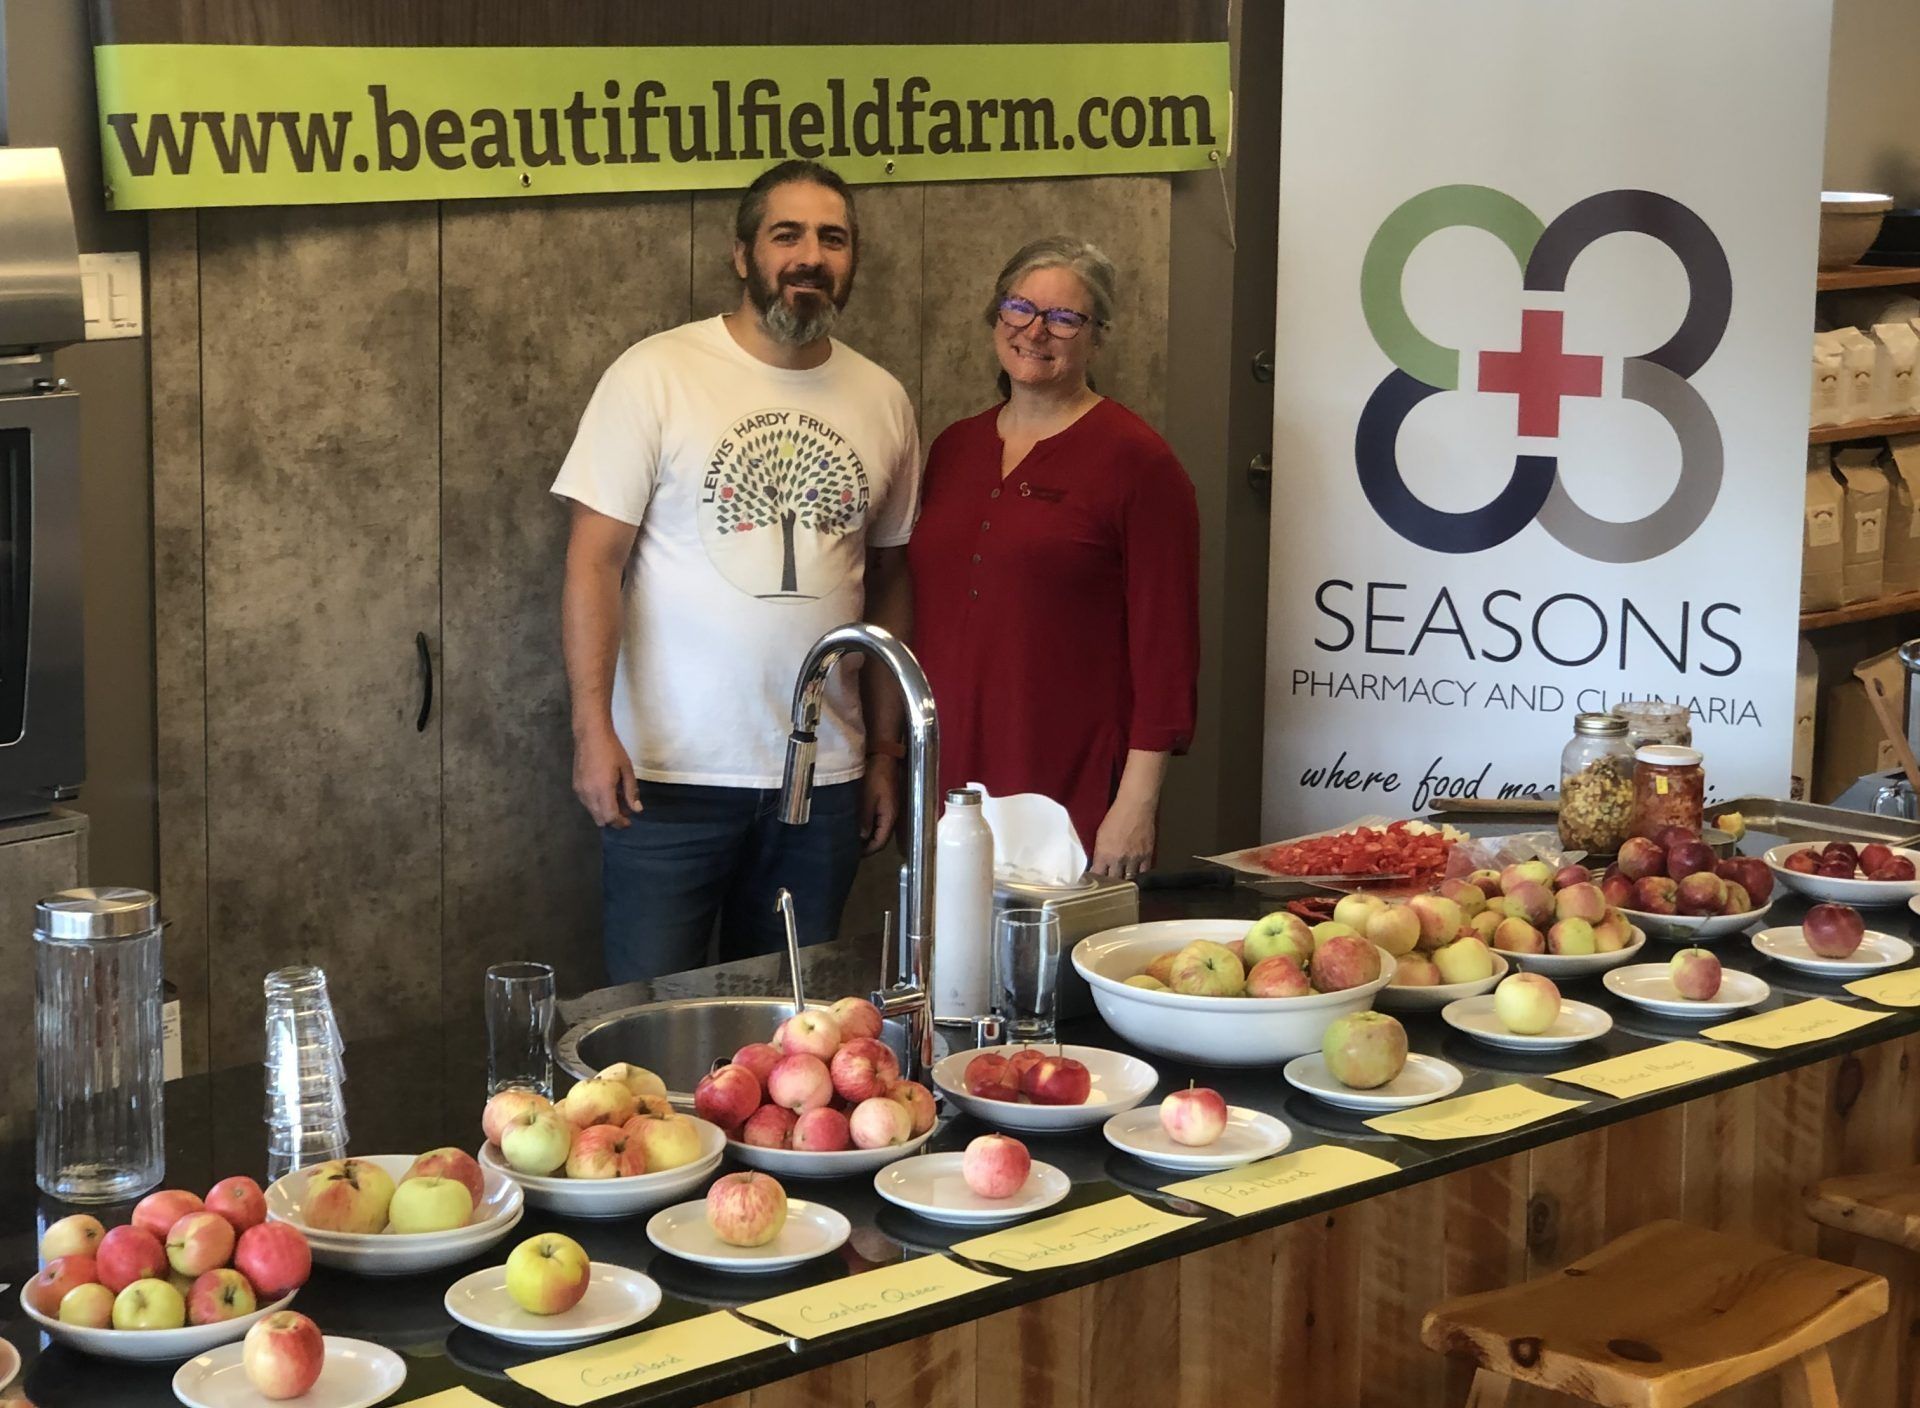 Sudbury’s second annual Applefest expands to four days